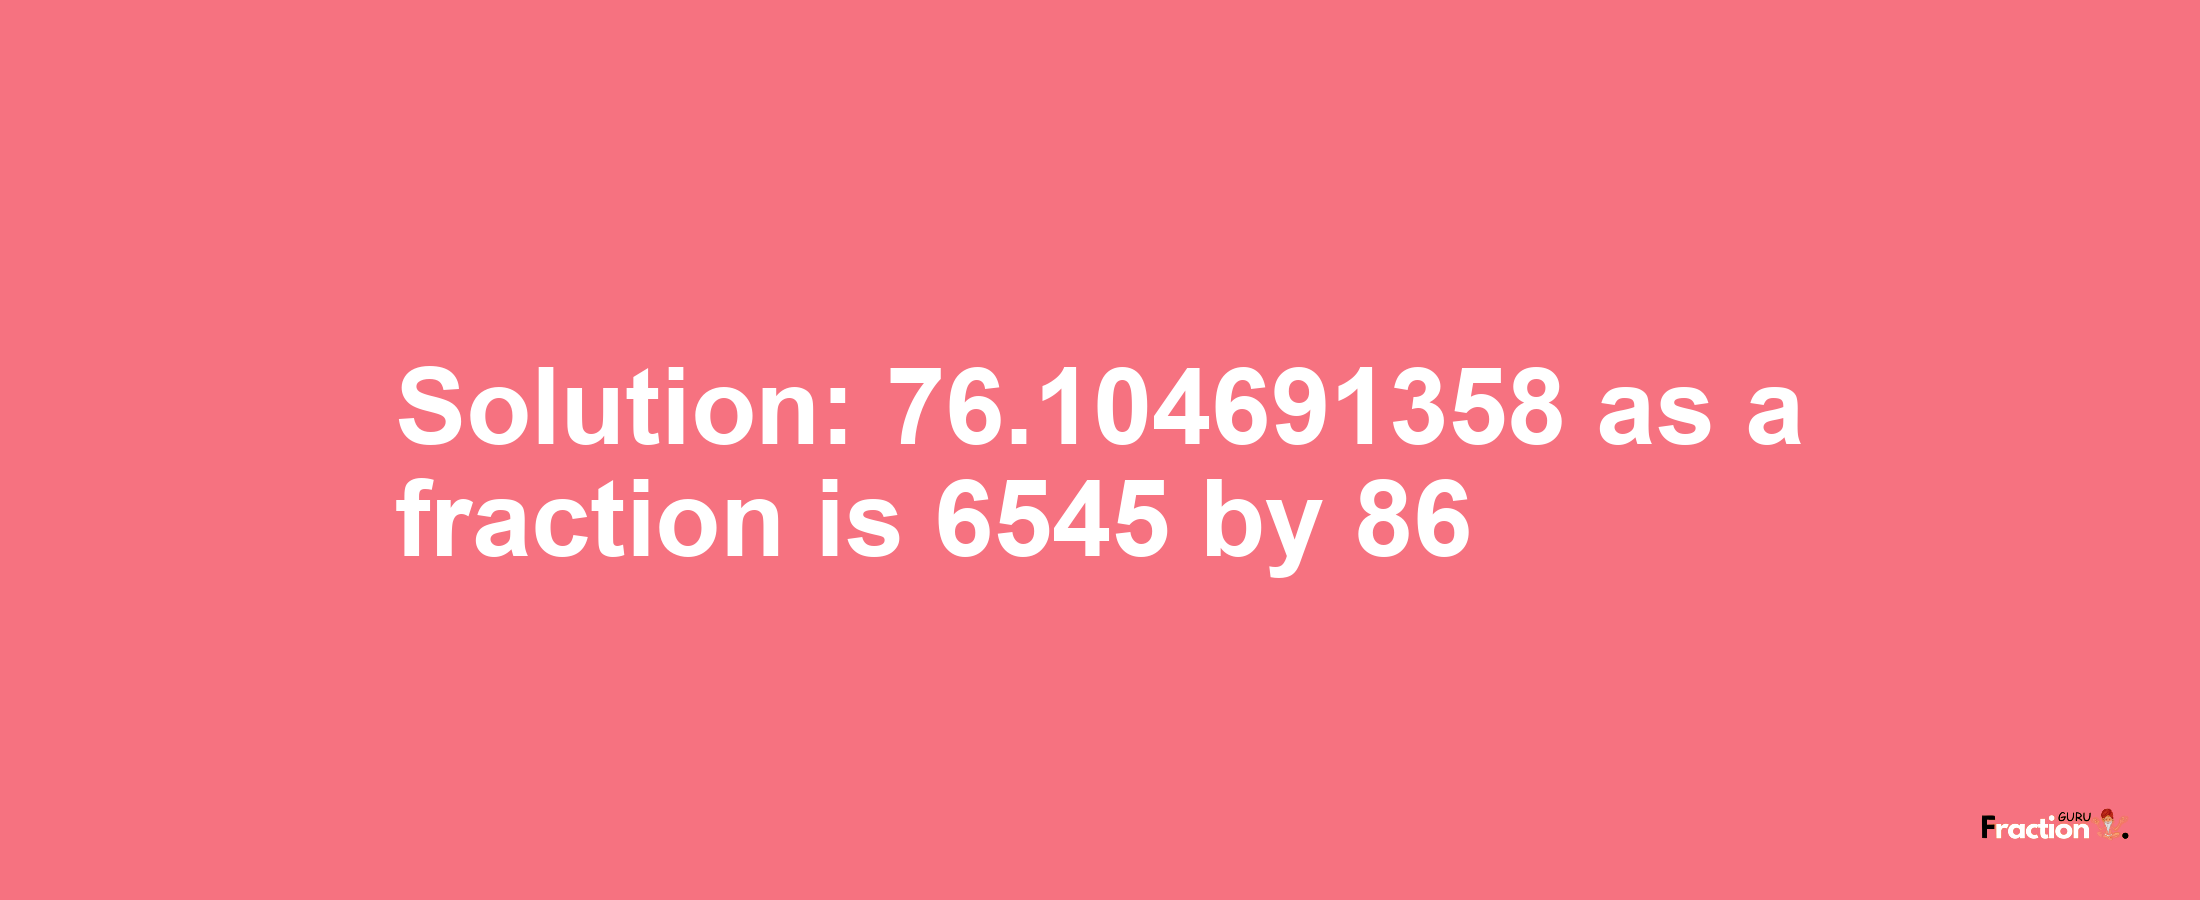 Solution:76.104691358 as a fraction is 6545/86